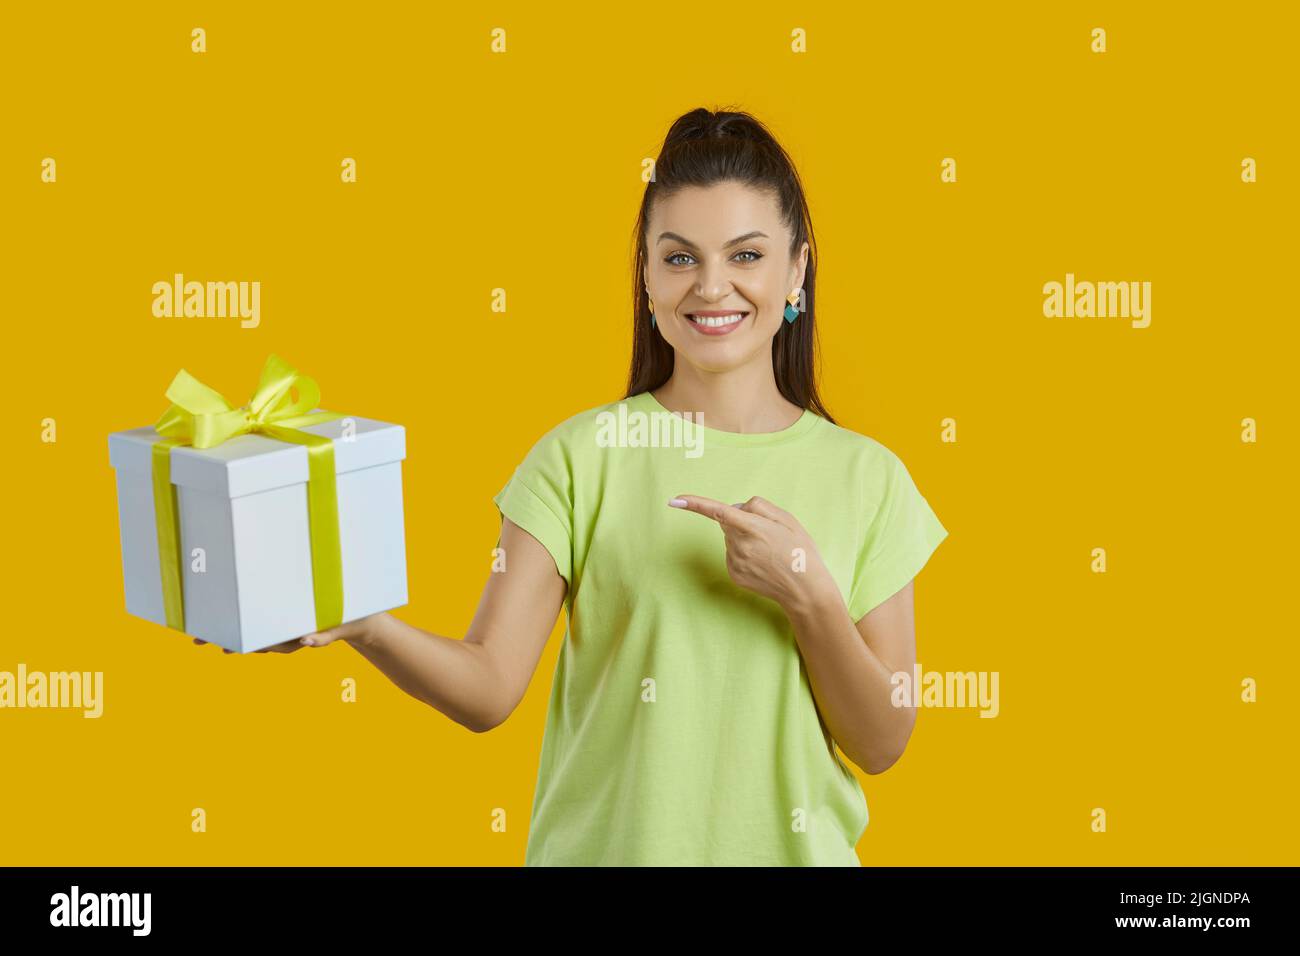 Smiling woman point at wrapped gift box Stock Photo